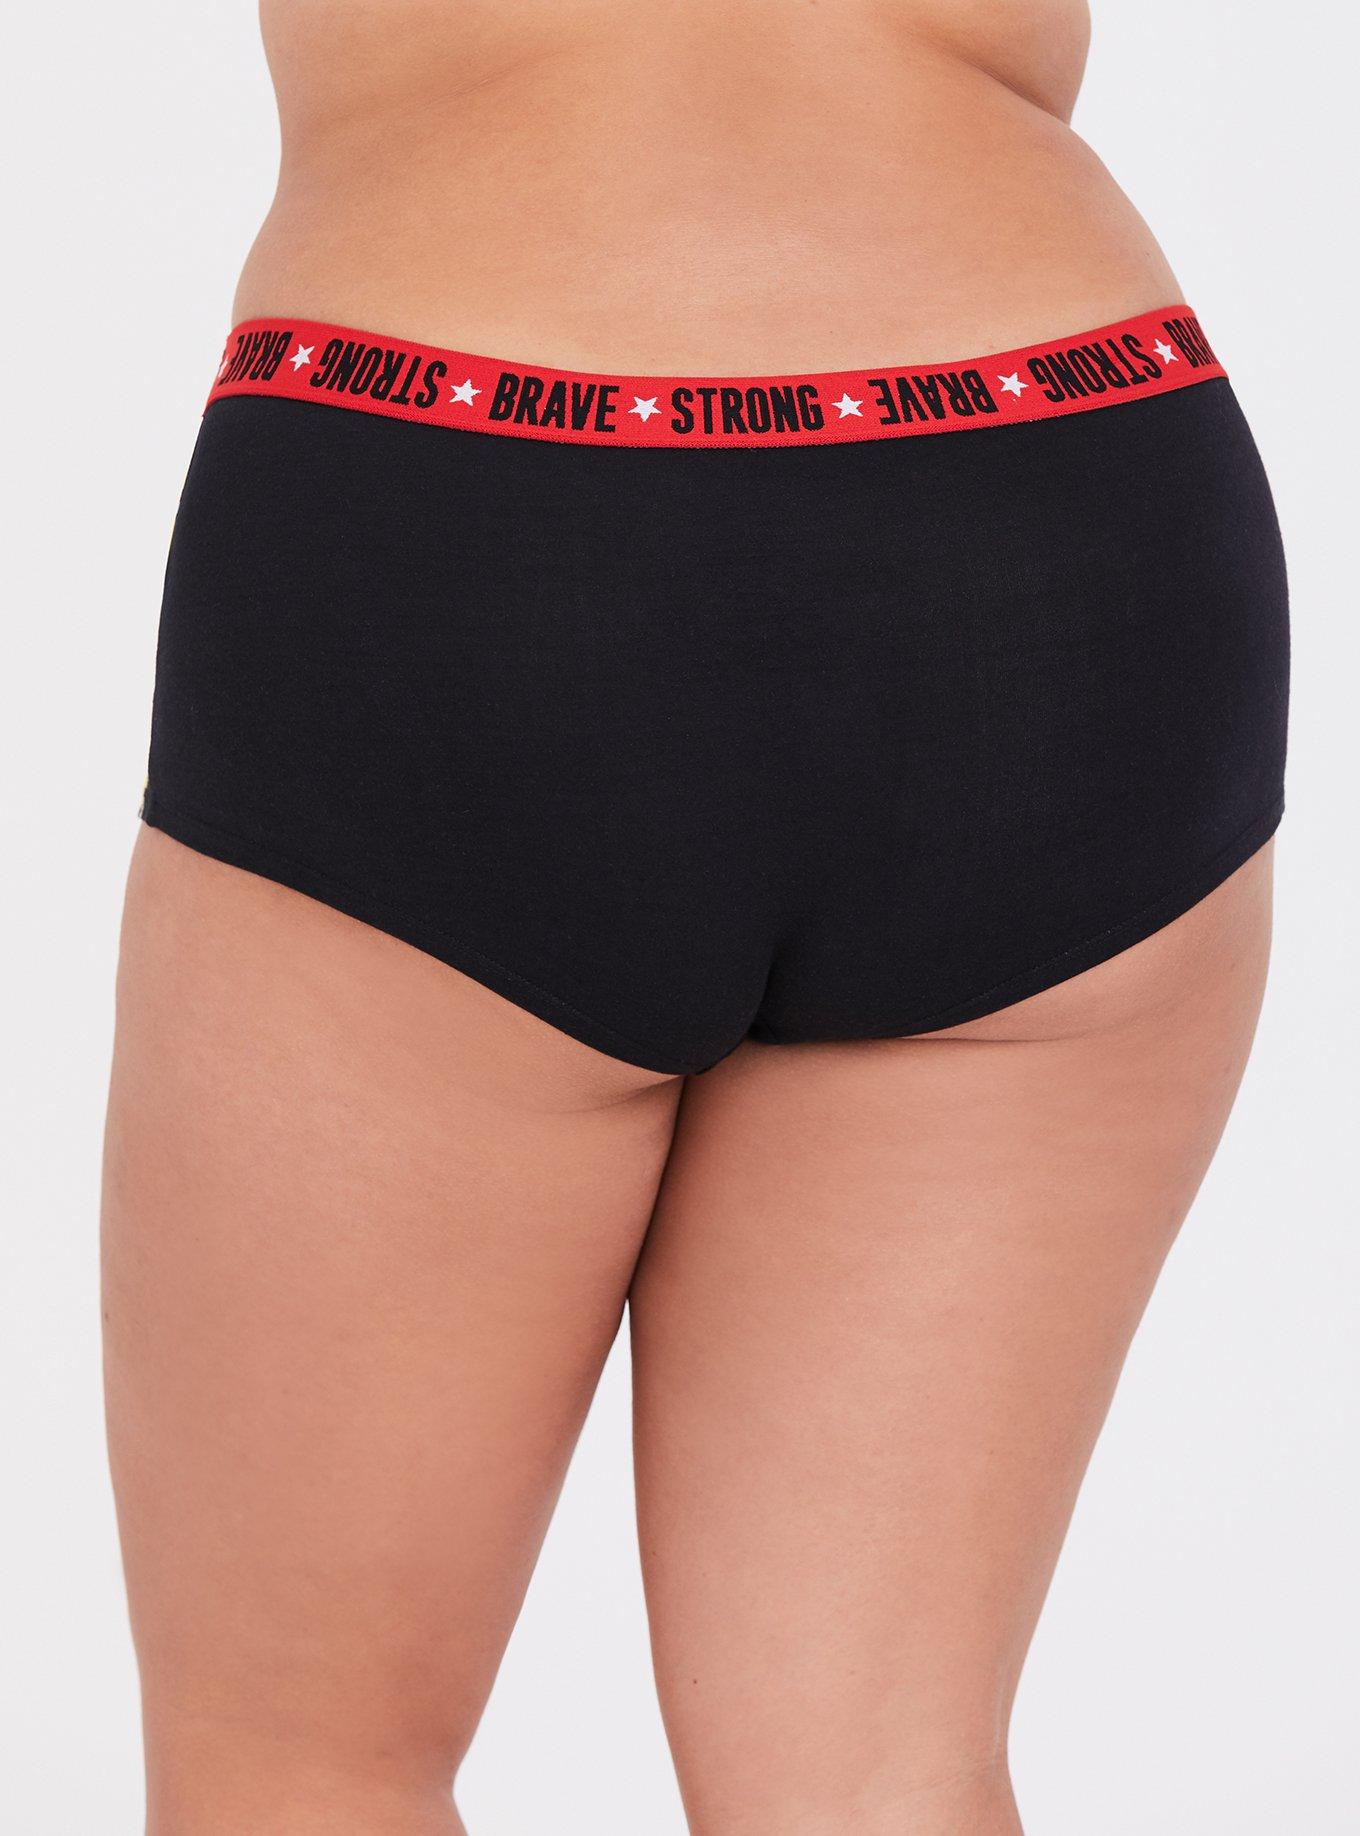 Wholesale wonder woman underwear In Sexy And Comfortable Styles